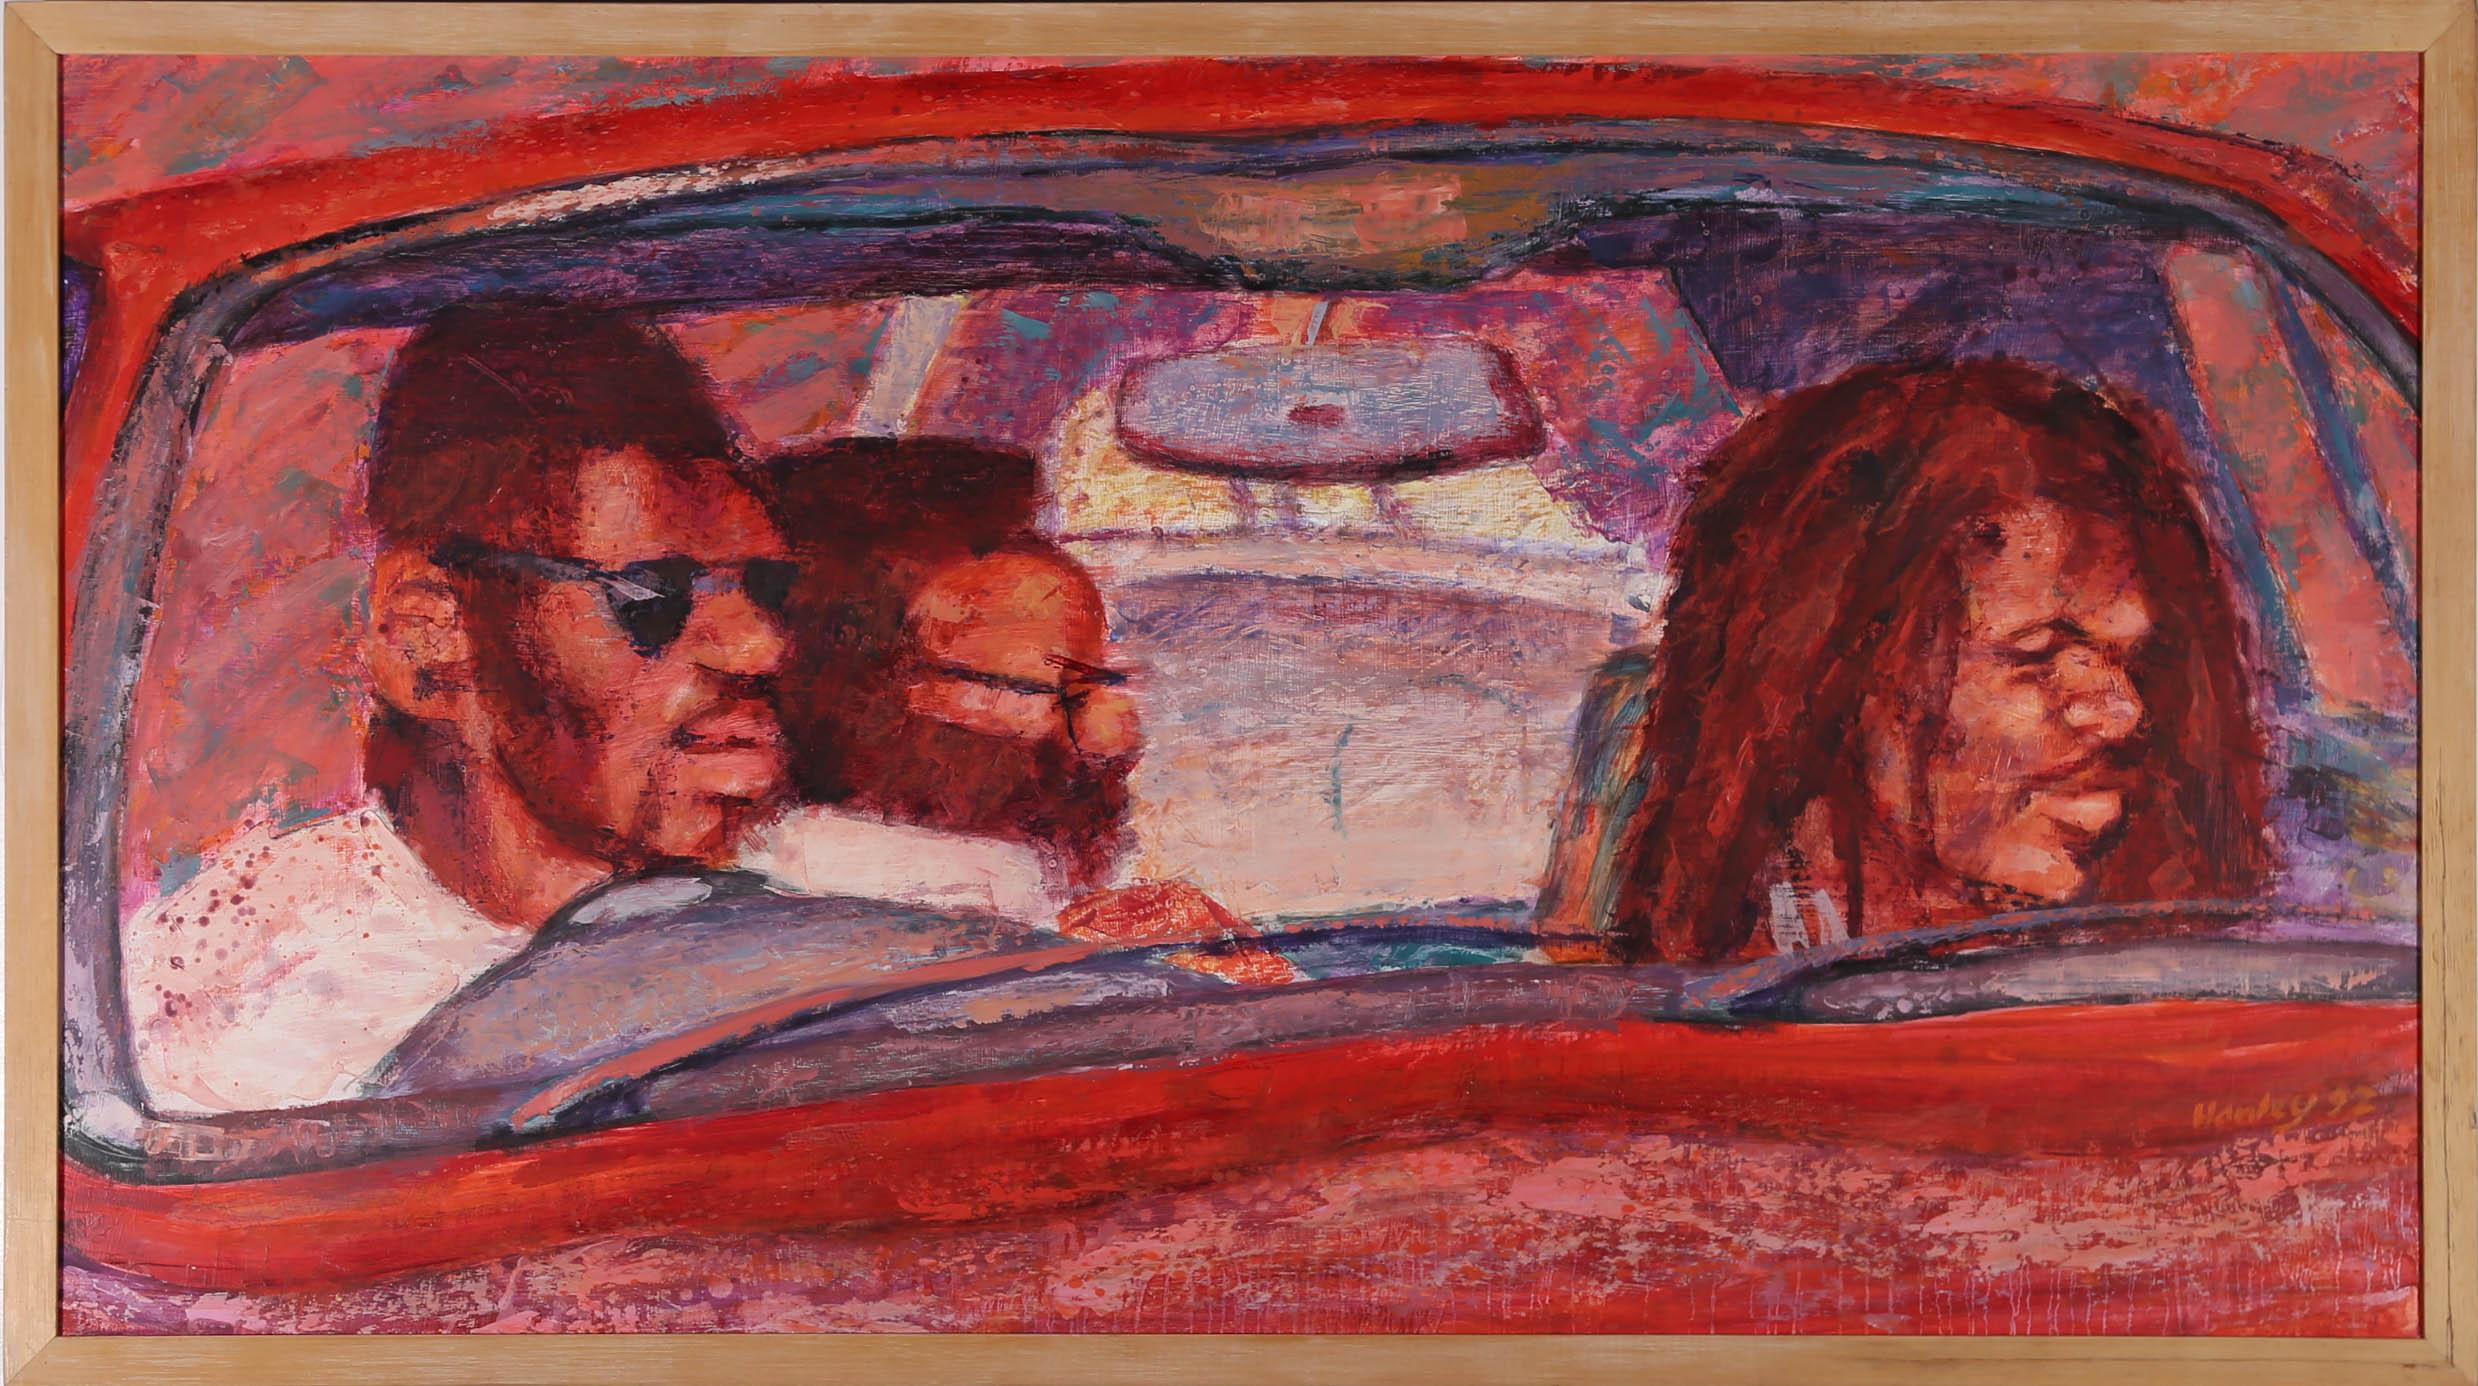 A busy modernist study by Clifford Hanley, capturing a second in the lives of three individuals, travelling in a car together. Signed and dated to the lower right-hand corner. Presented in a slim wooden frame. On board.